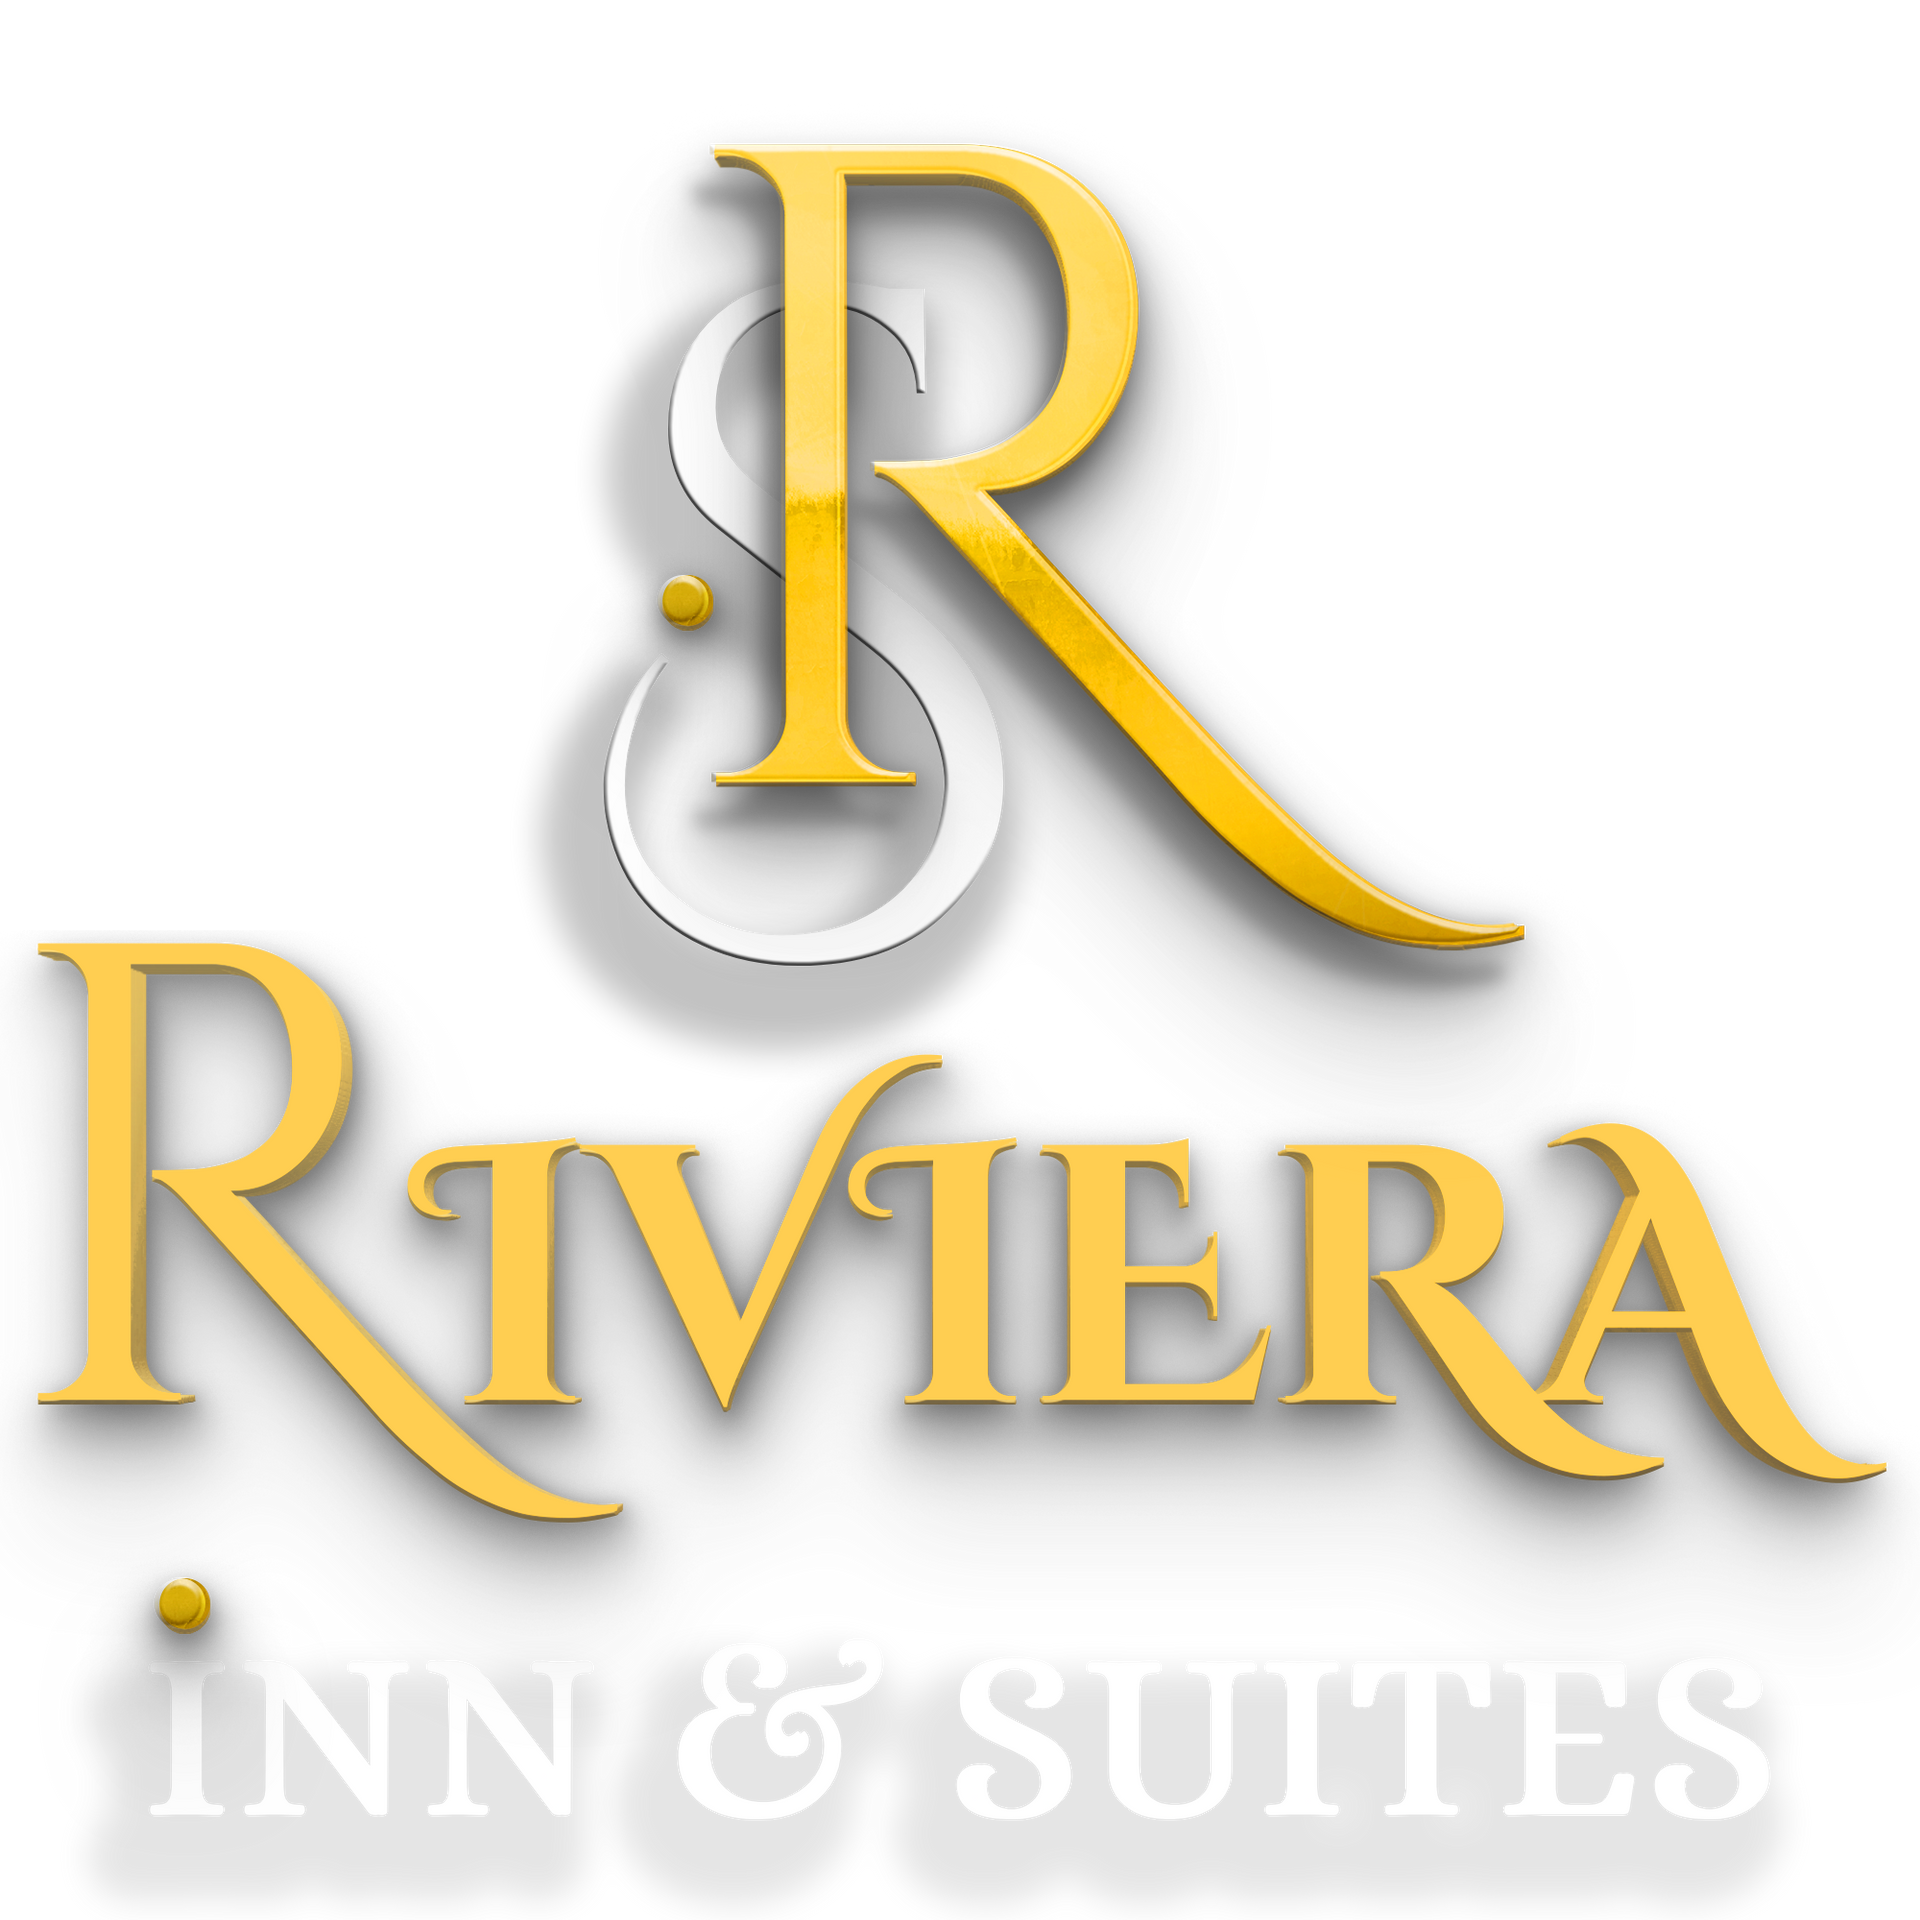 a logo for riviera inn and suites with a white background